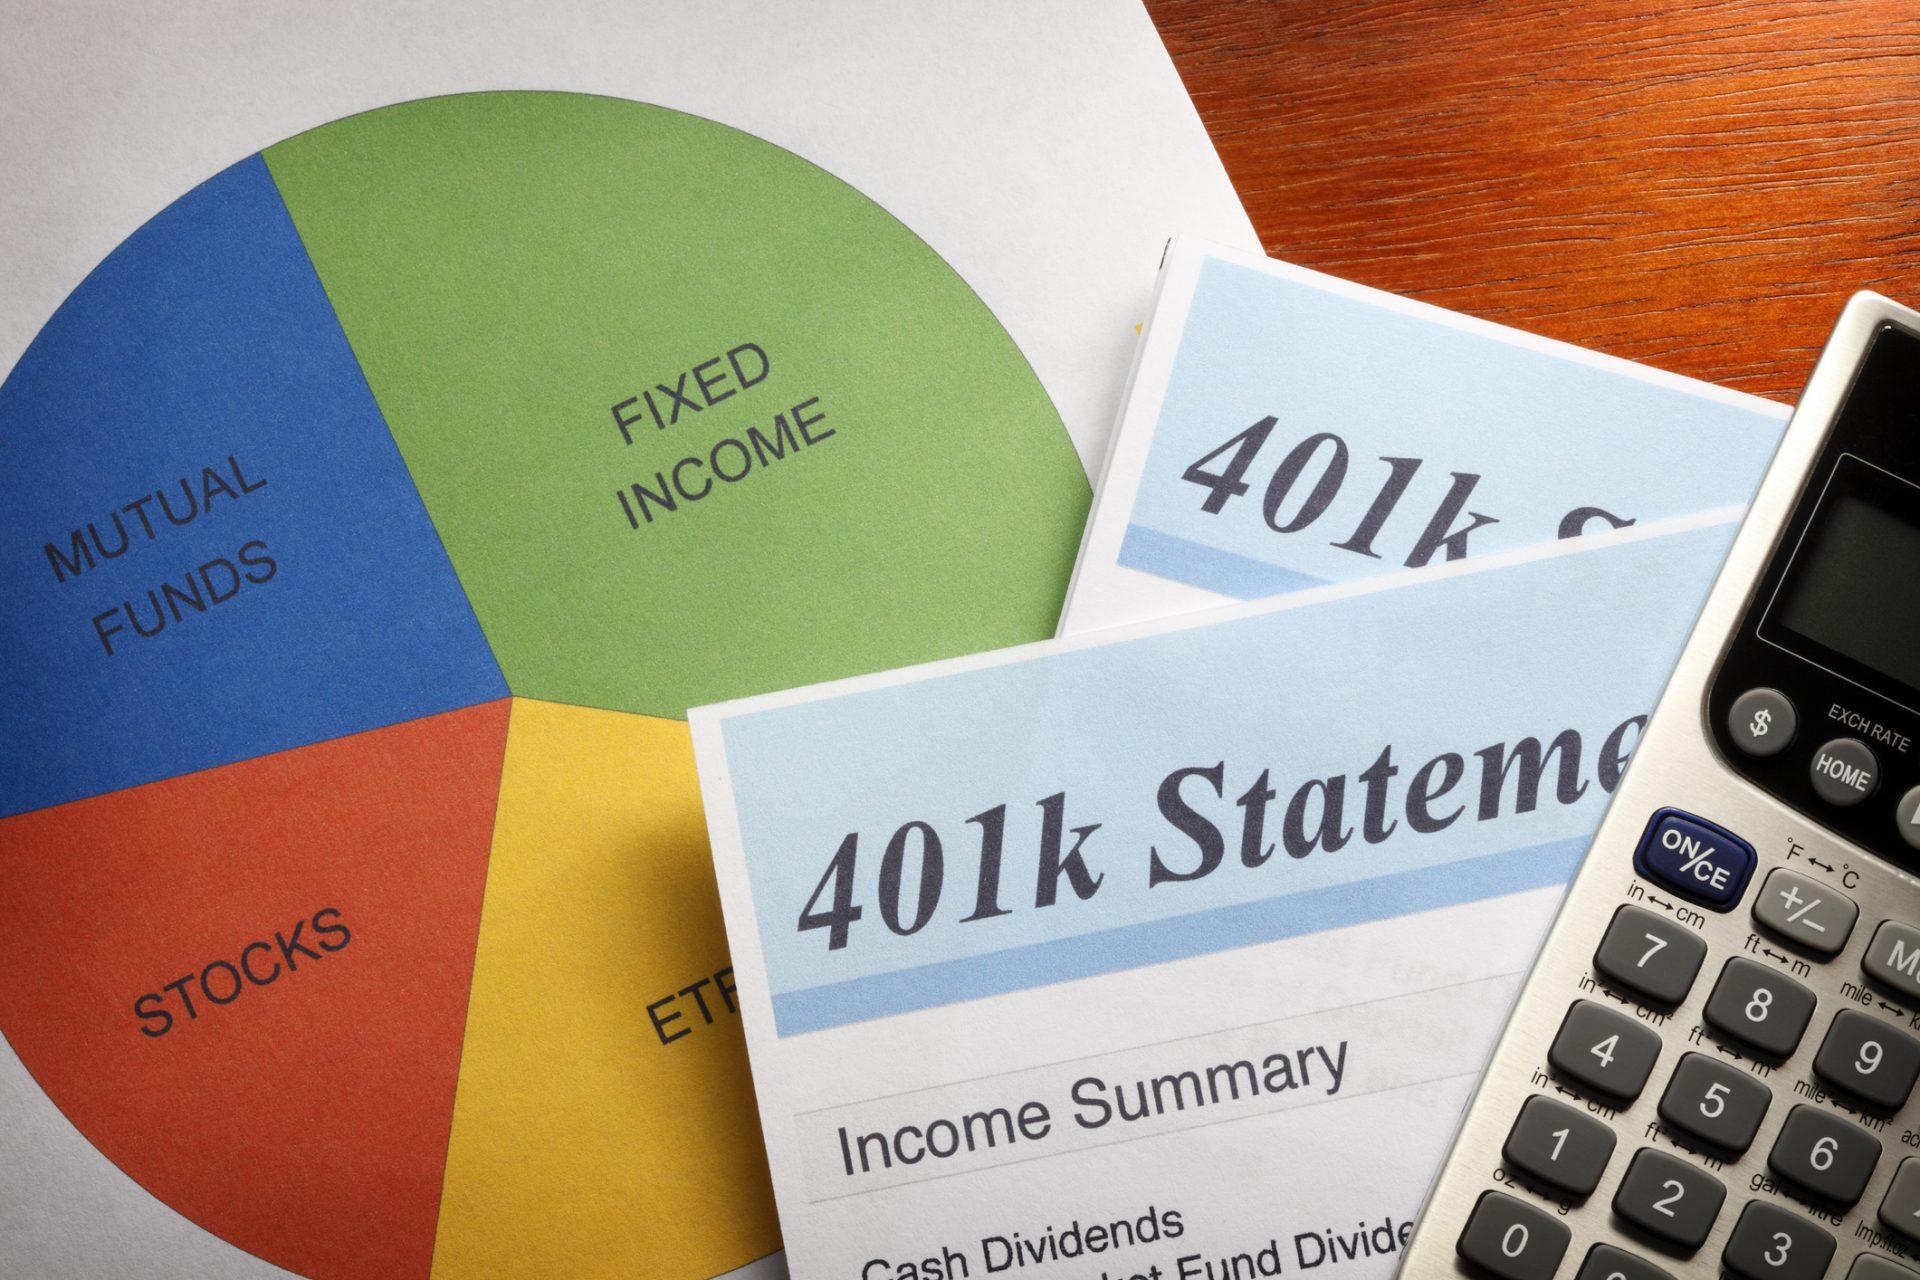 Forgot to Roll Over Your Old 401(k)s? Youâre Not Alone â This New Bill ...